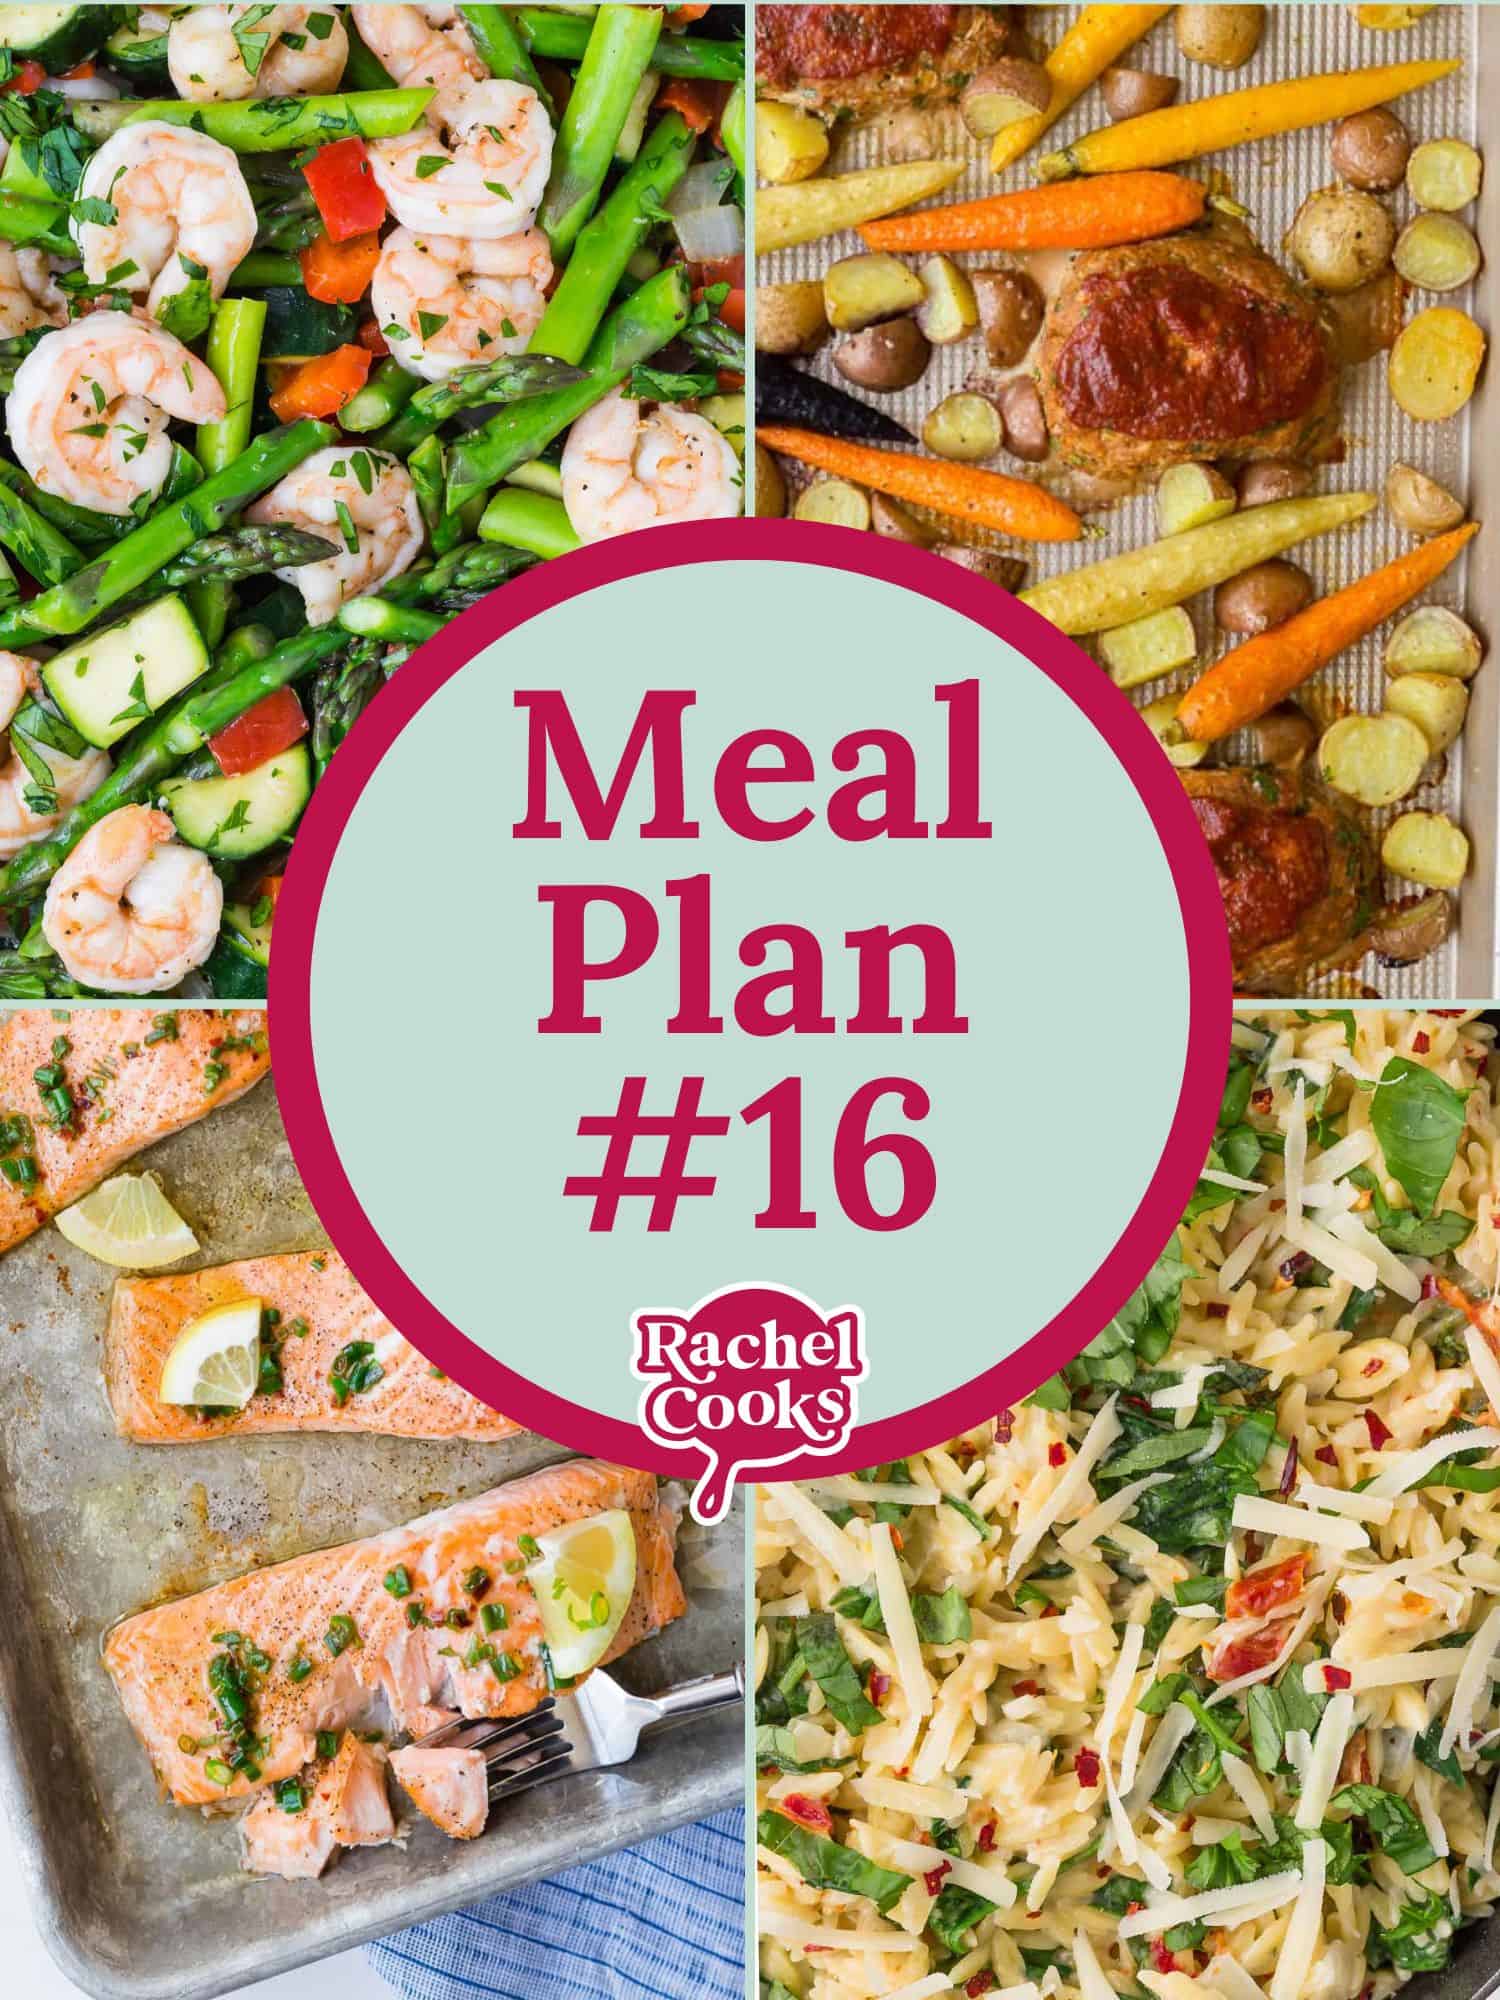 Meal plan 16 post graphic.